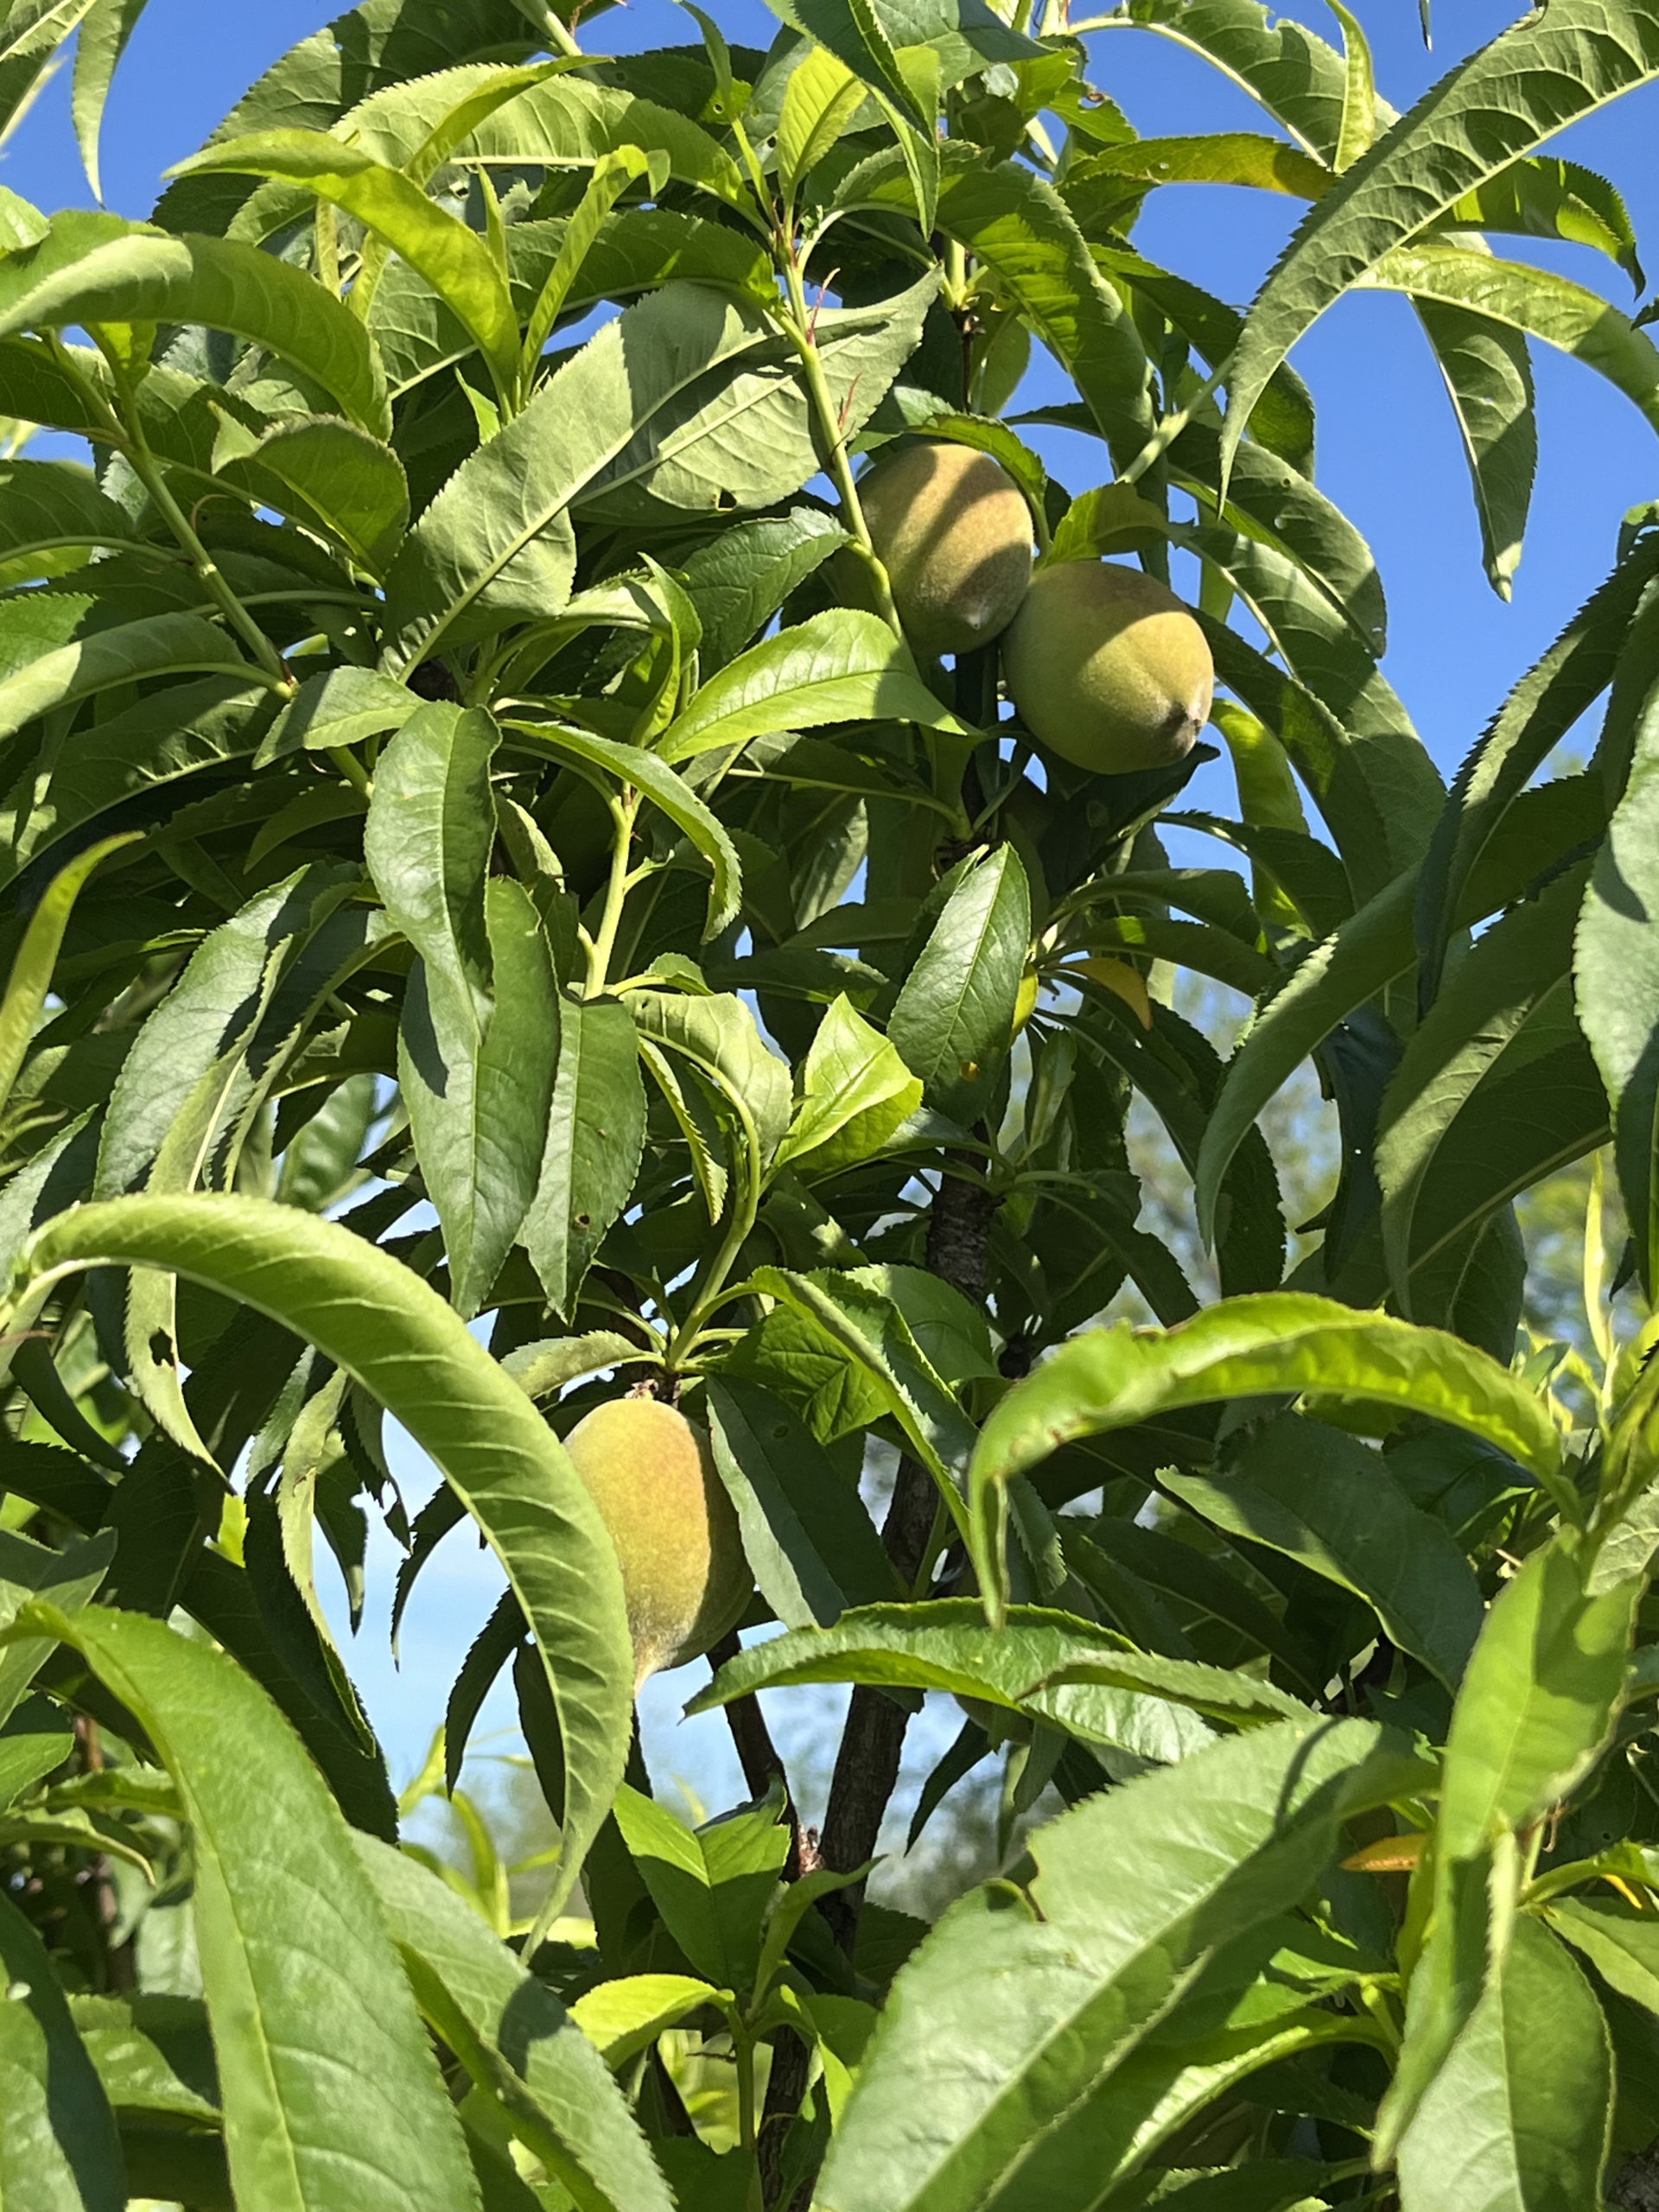 Featured image for “Peachy Comeback: Georgia Fruit Set for Bumper Crop After Disastrous Season”